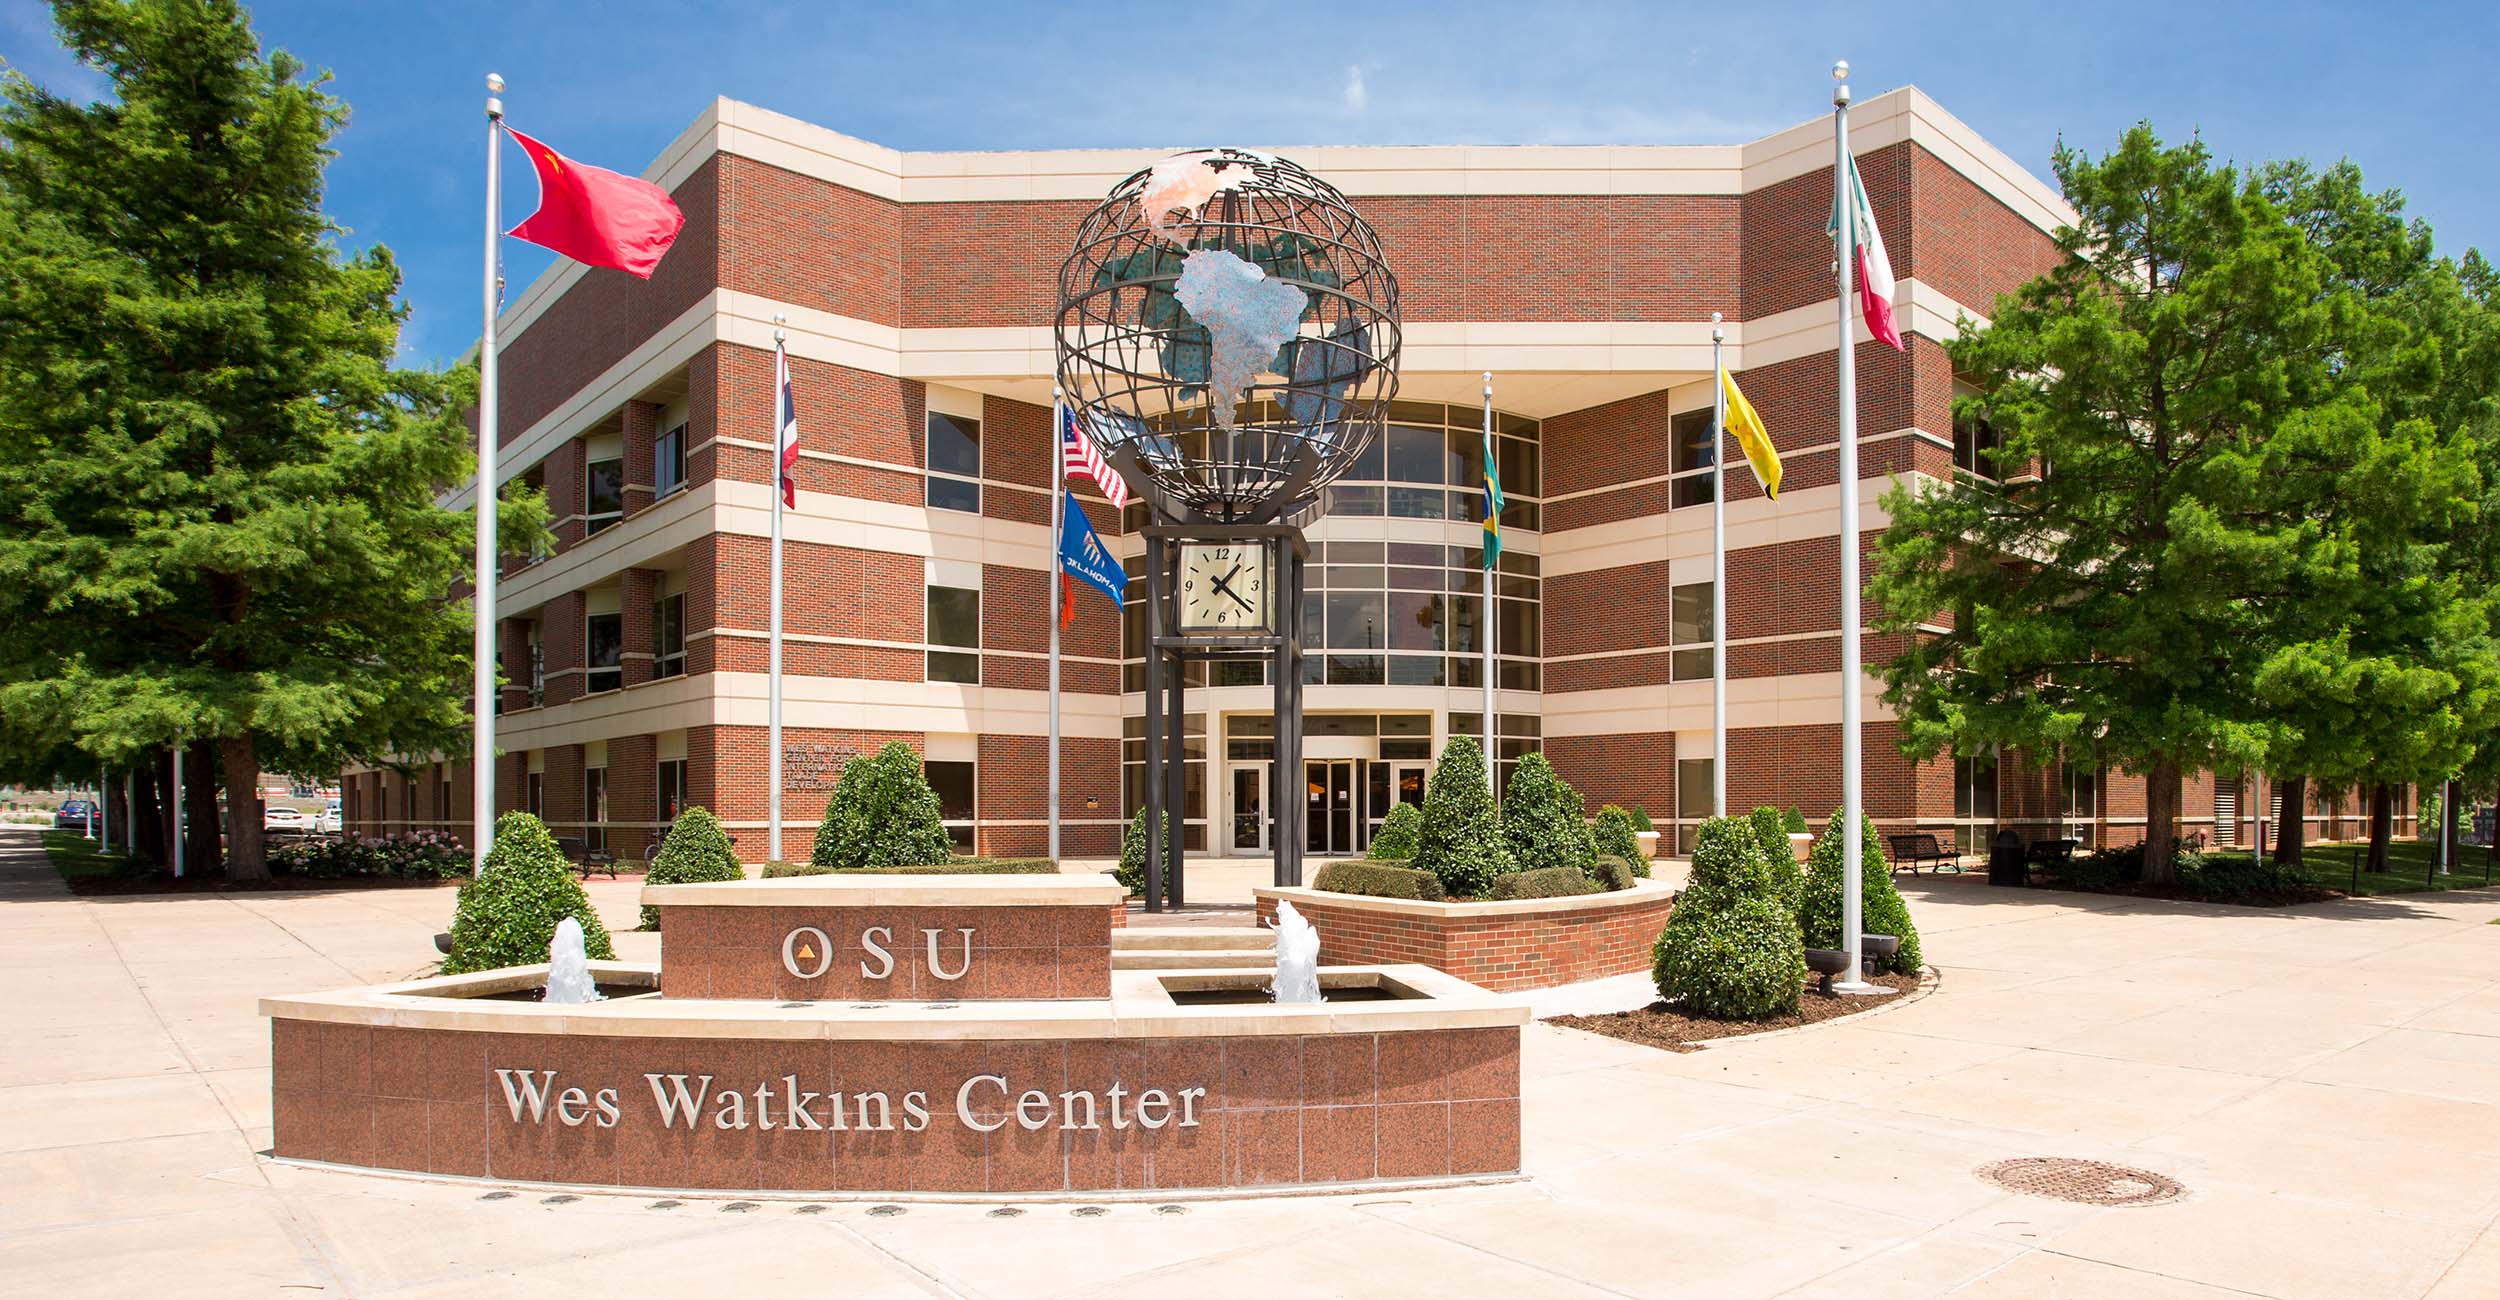 The Wes Watkins Center at Oklahoma State University.